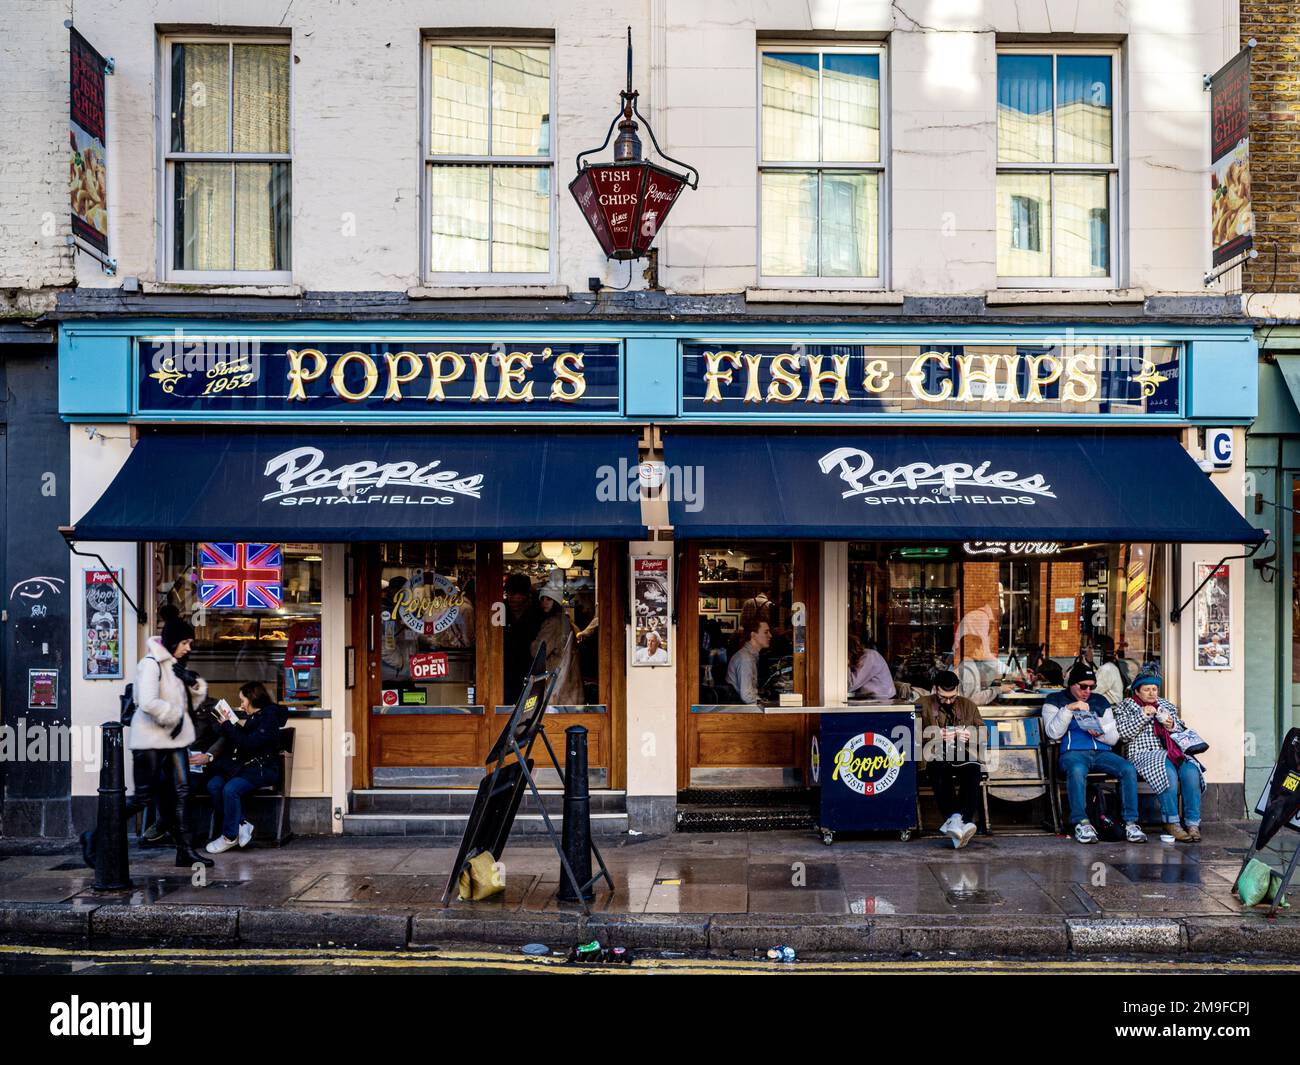 Poppie's Fish & Chips Shop Spitalfields London. Poppies Fish and Chips Shop was founded in 1952. British Fish & Chip Shop. Stock Photo